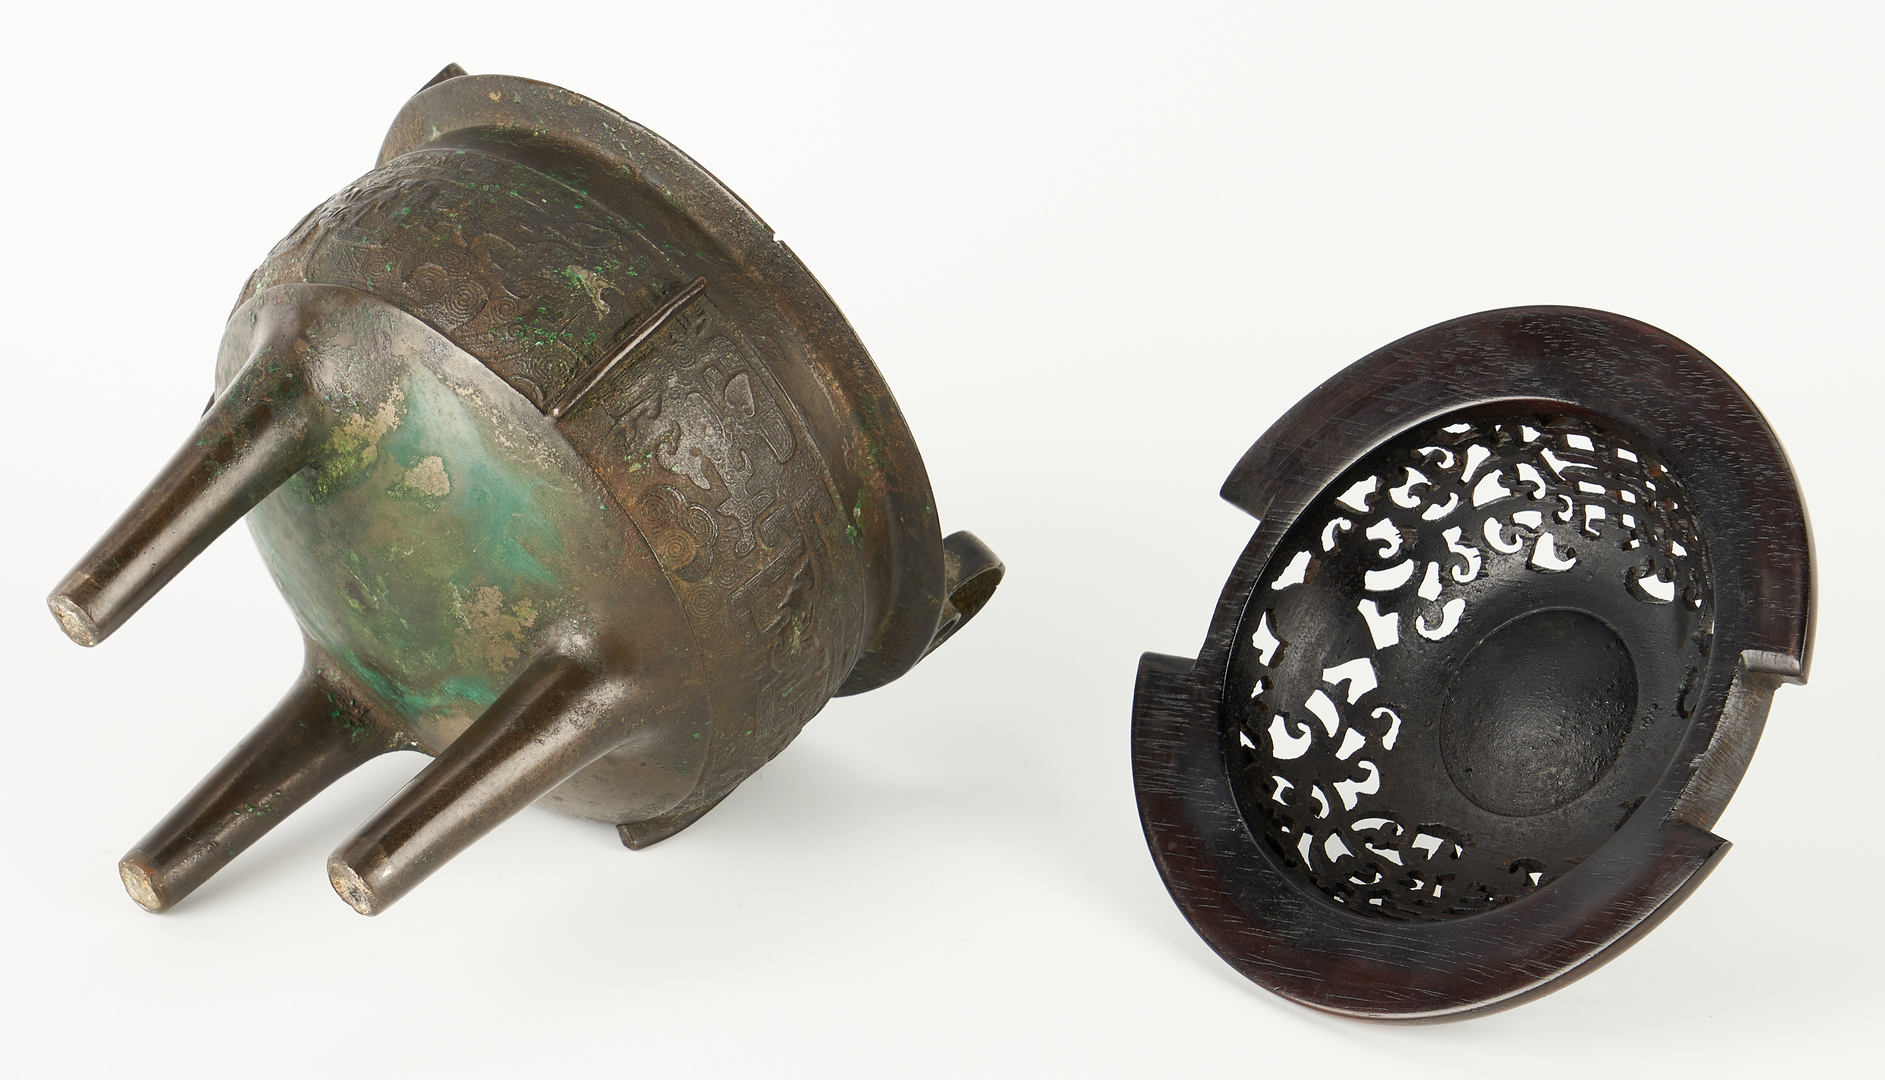 Lot 12: Chinese Bronze Censer with White Jade Finial